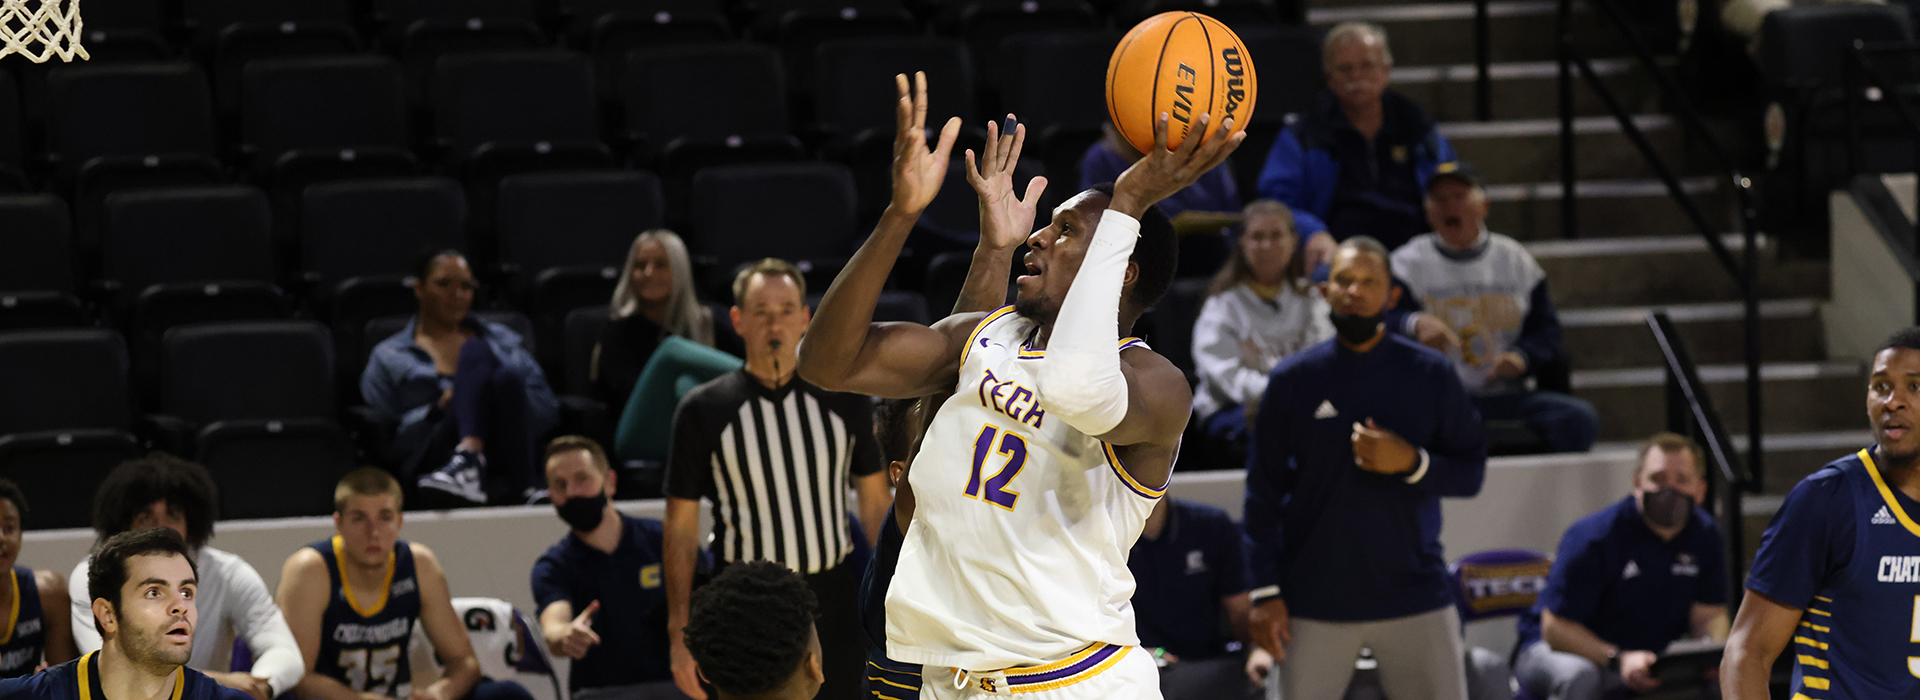 In-state rival Mocs use second-half comeback to down Golden Eagles